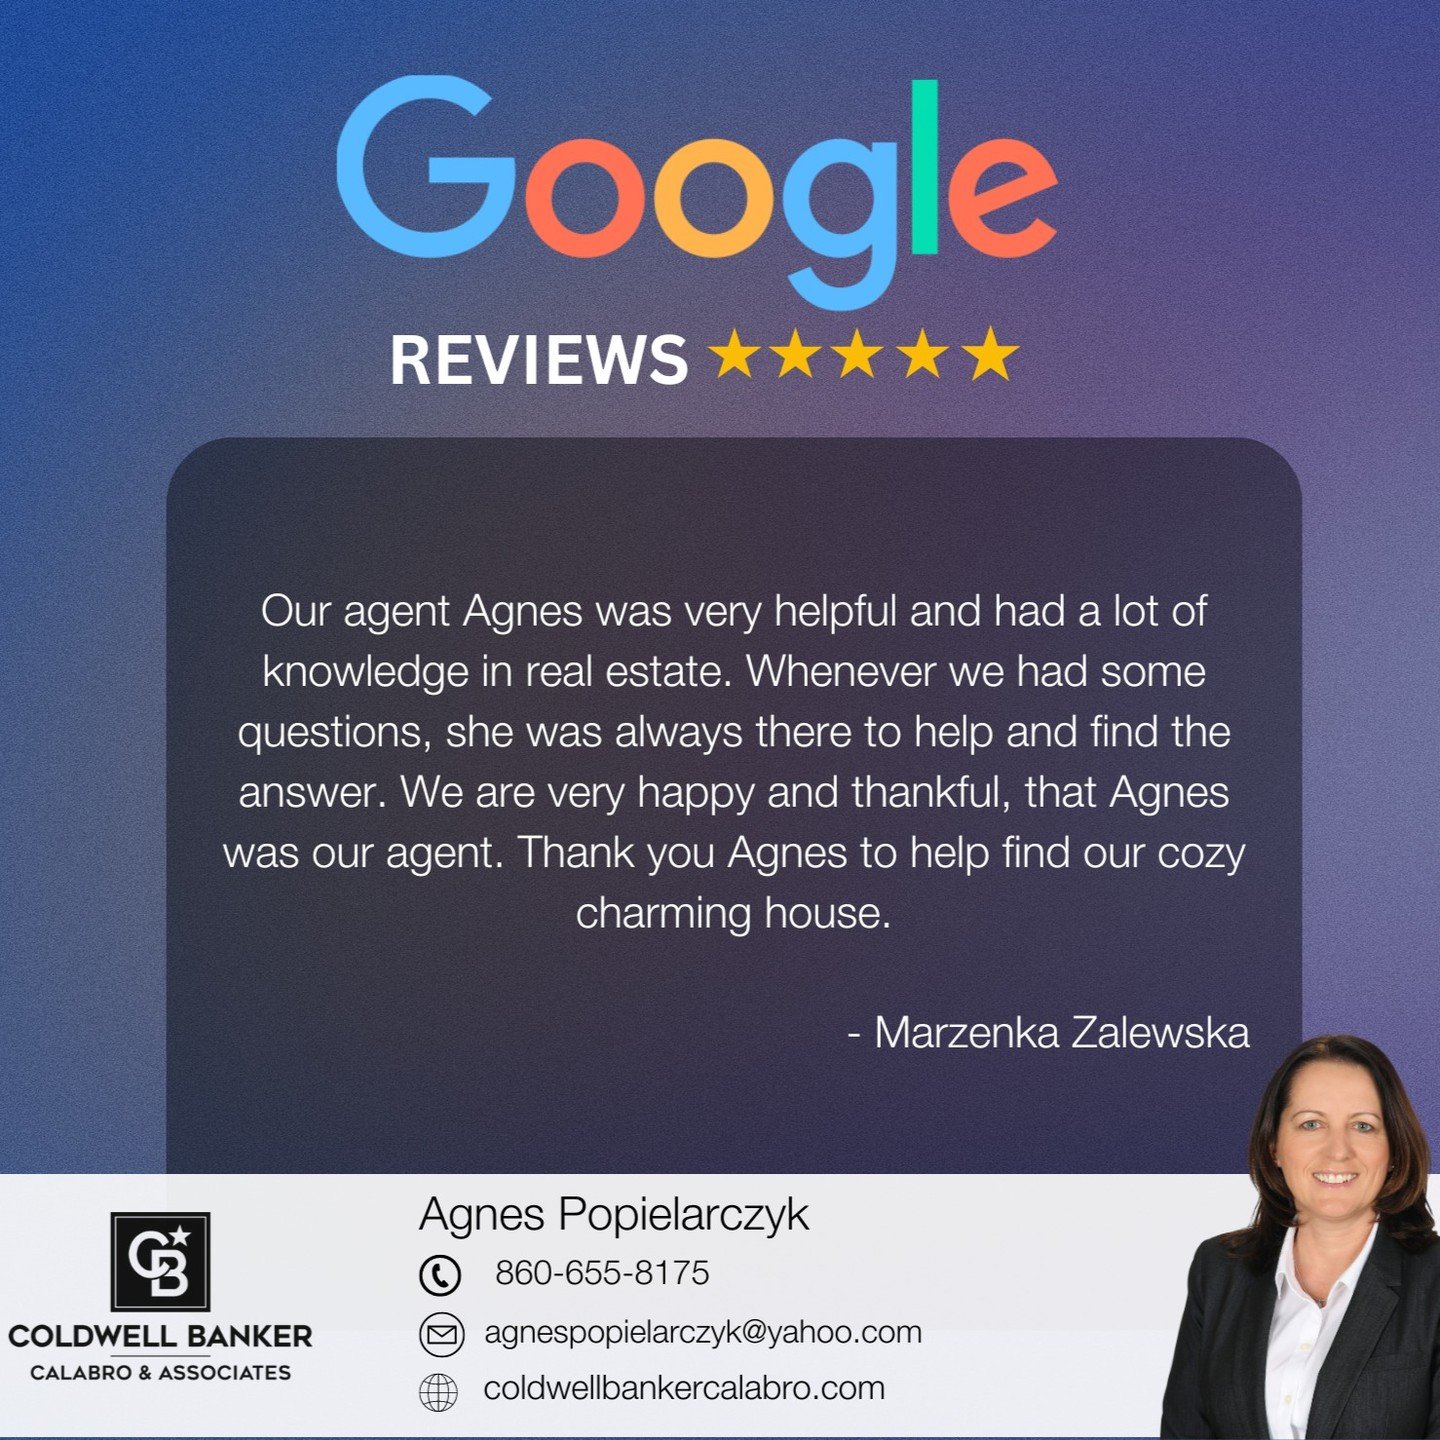 Thank you to our wonderful clients for your reviews! We appreciate every single one 😊 And great job Agnes!!!